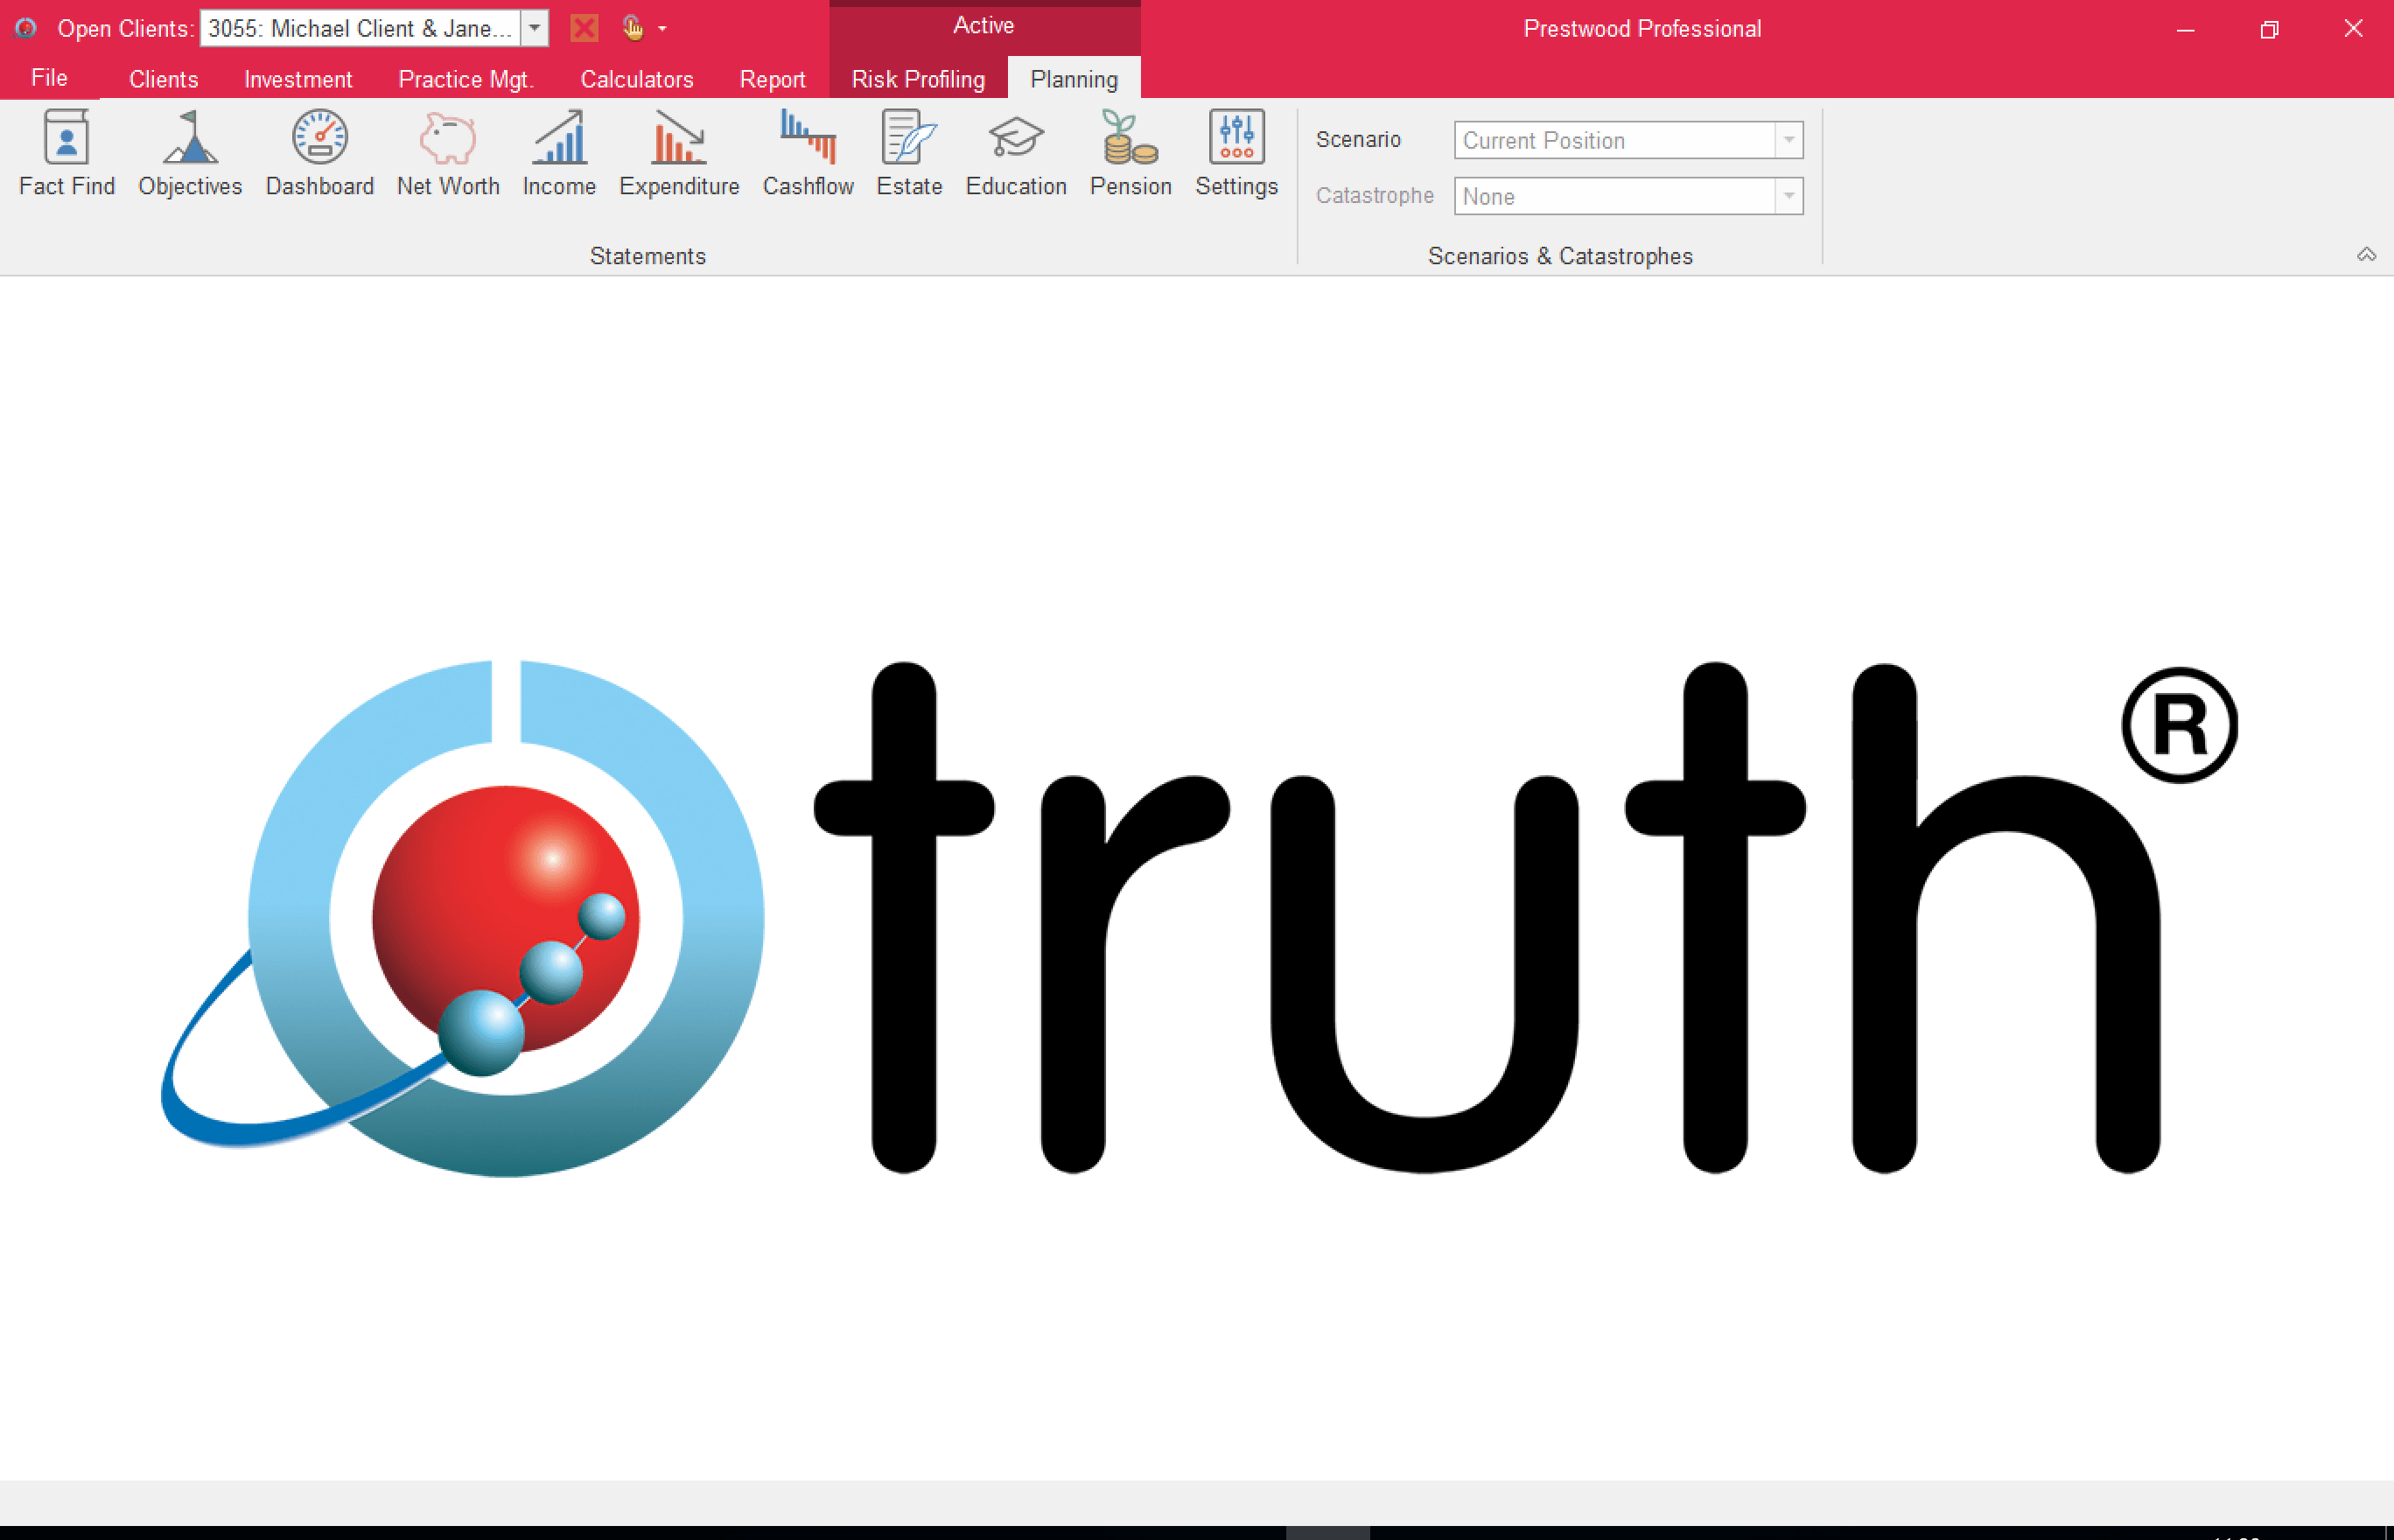 prestwood truth software release notes streamline client meeting experience default tab show branding